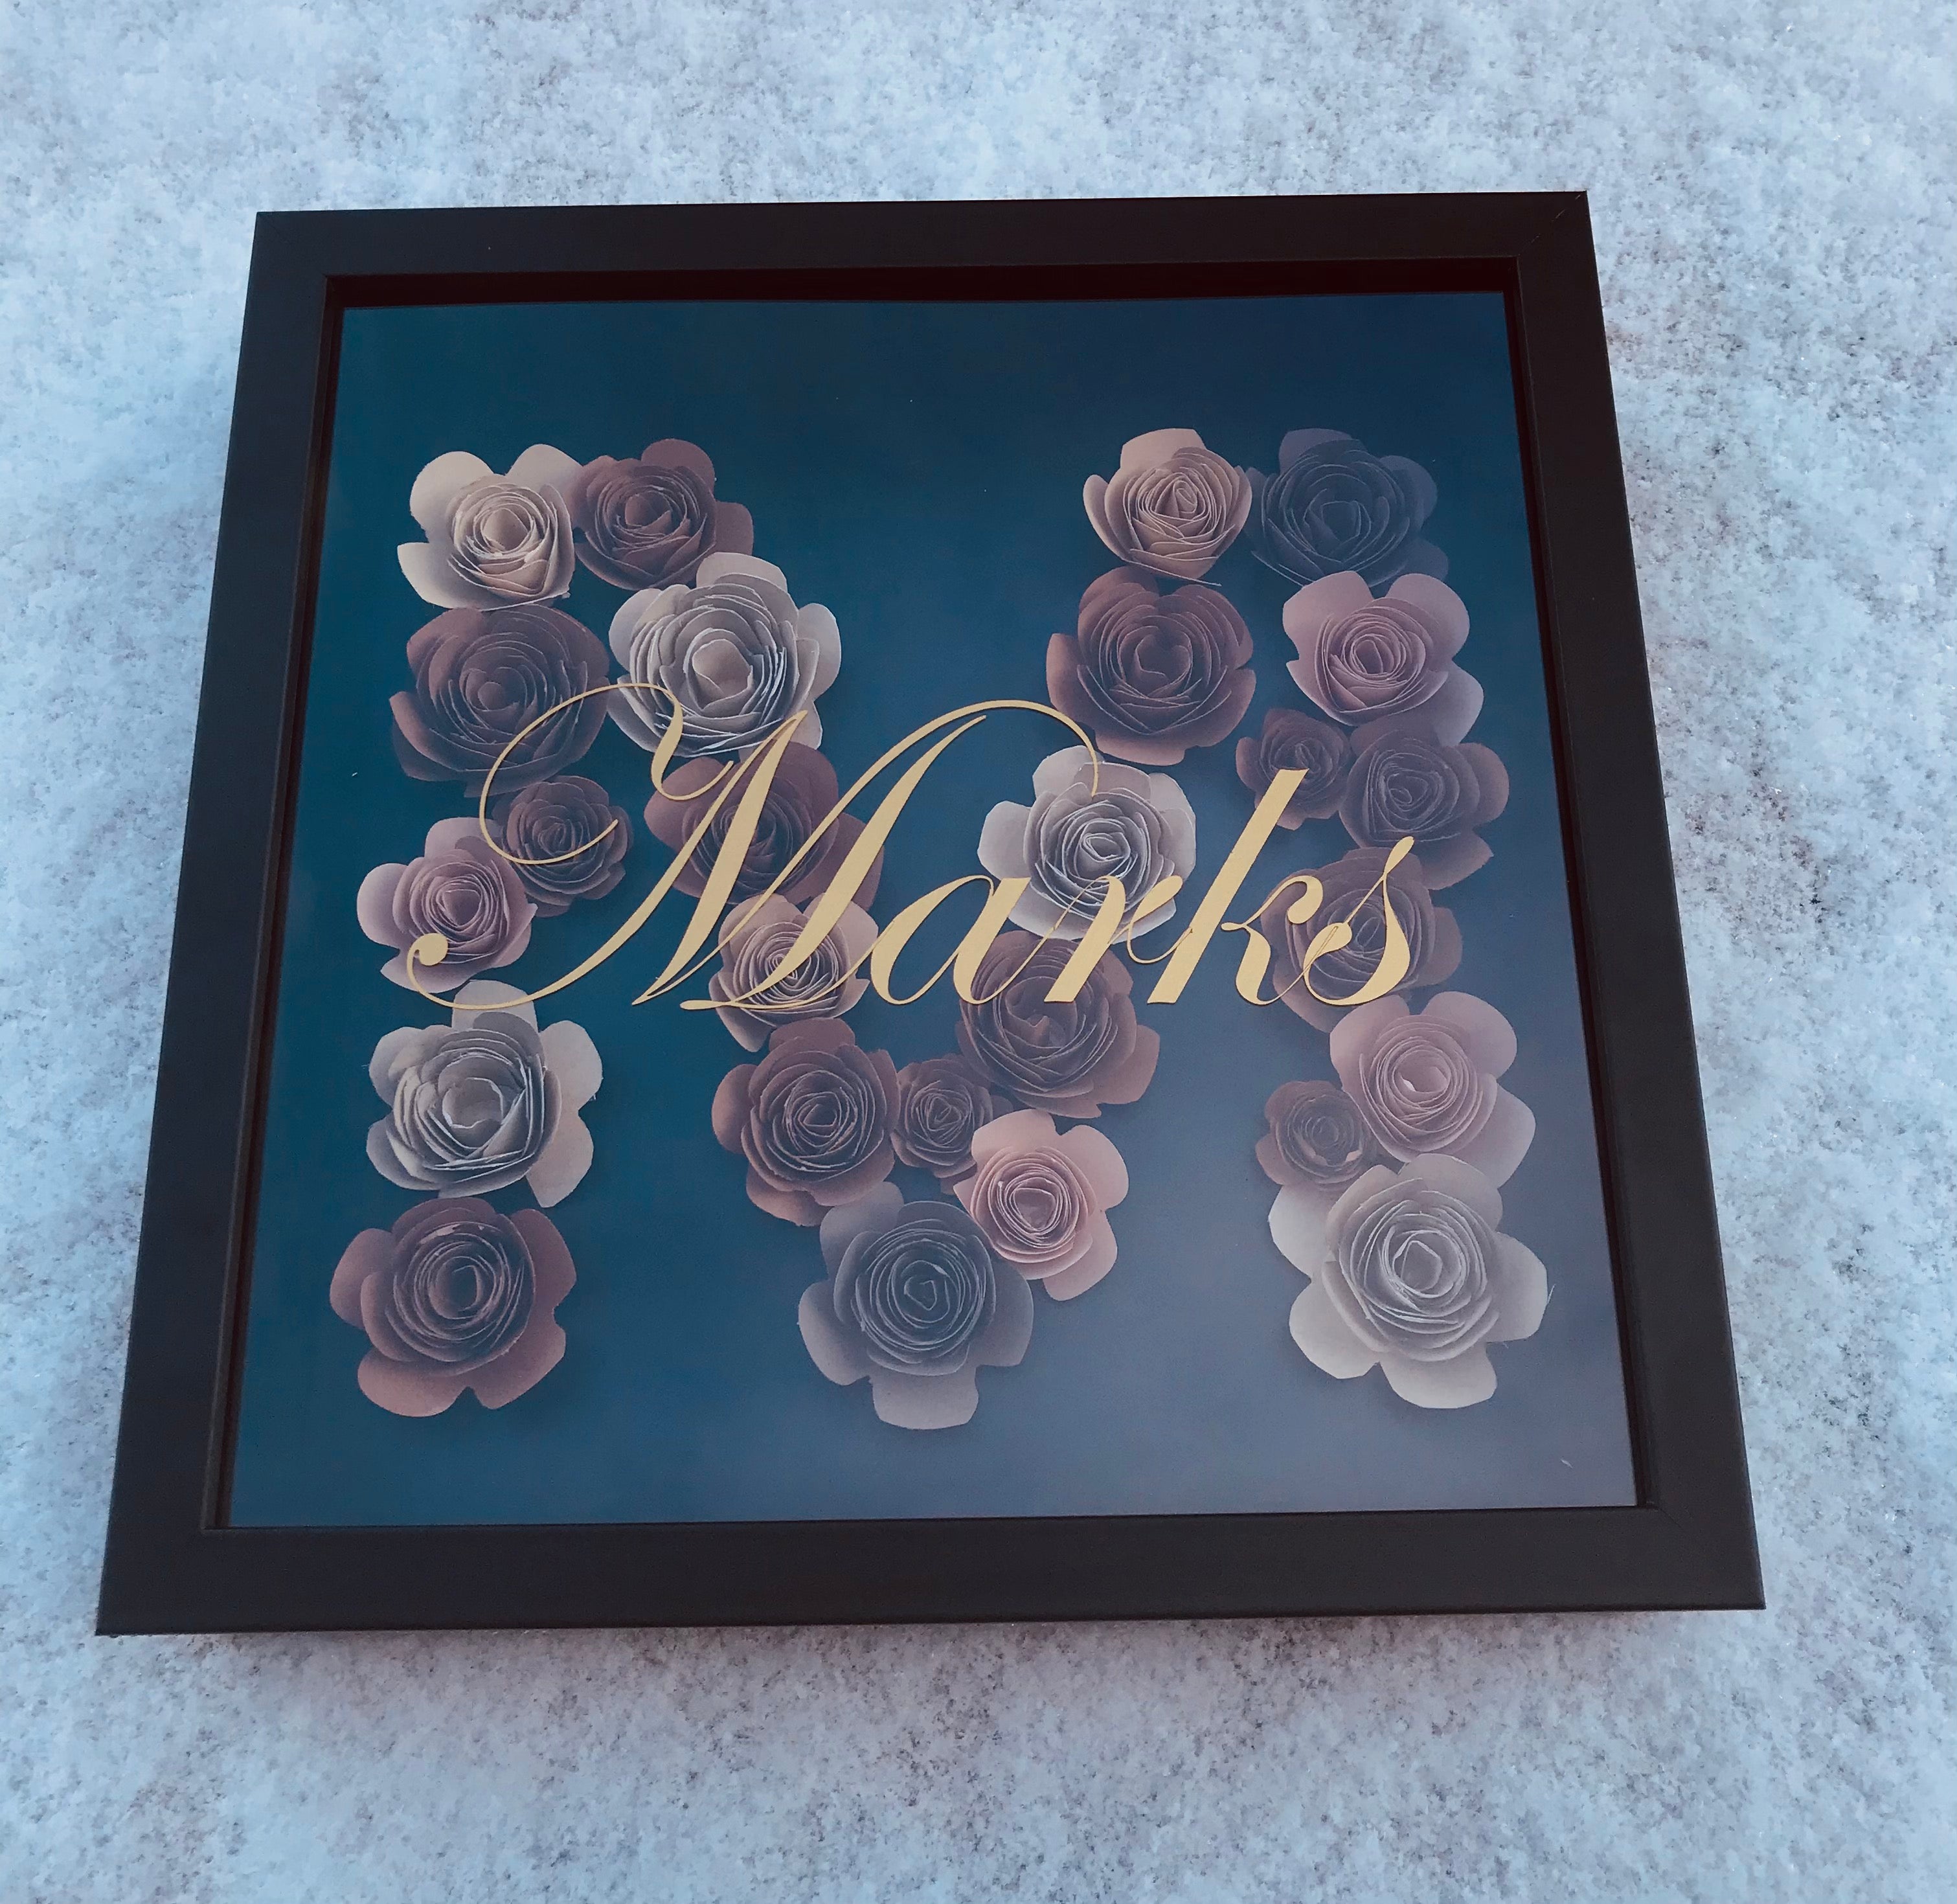 Heart frame with personalized text-Posters, Prints, & Visual Artwork-DiamondsKT